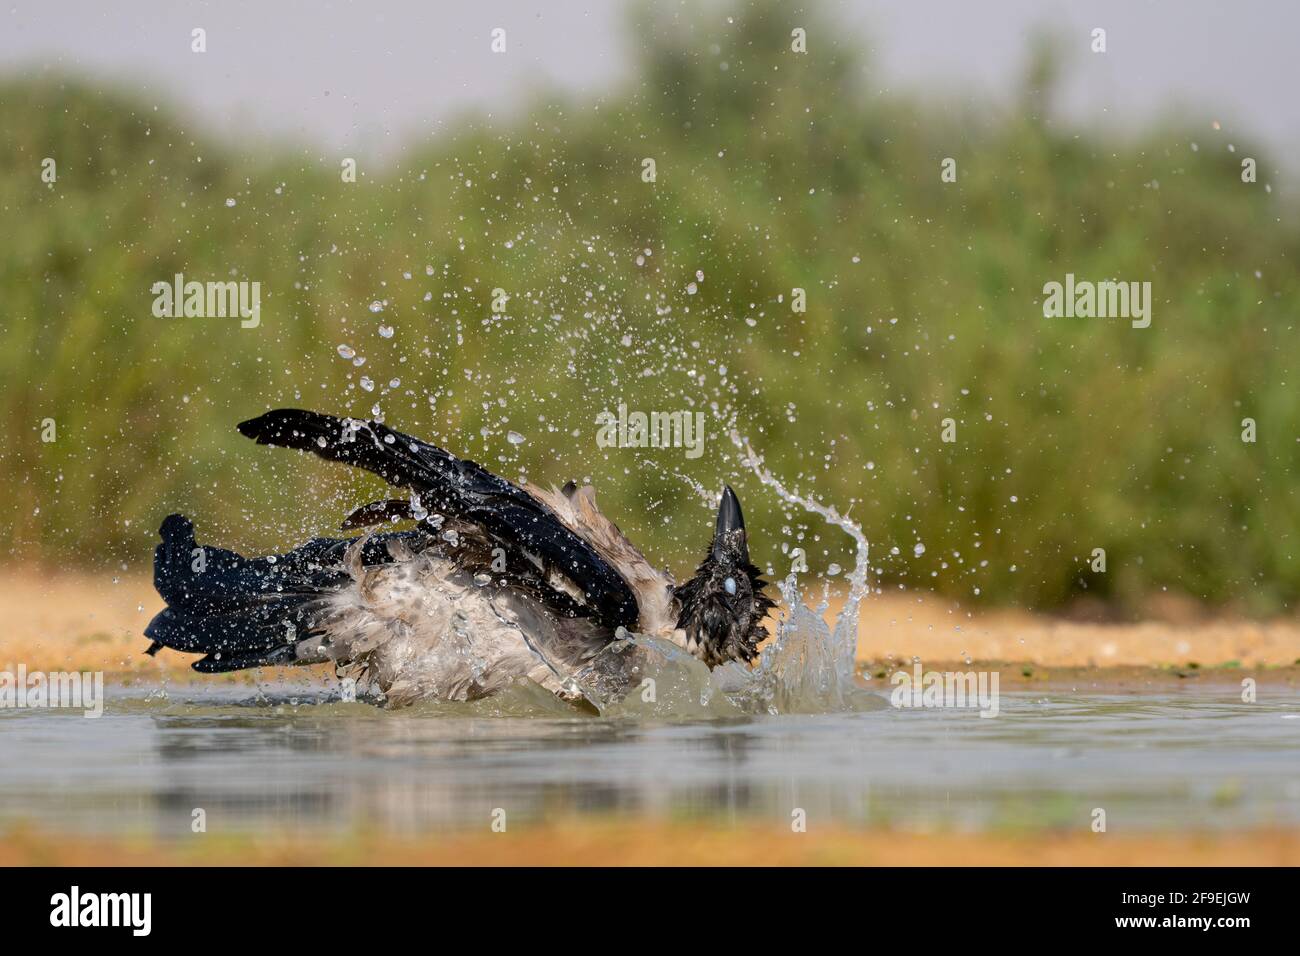 Hooded crow (Corvus cornix) near water The hooded crow is a widespread bird found throughout much of Europe and the Middle East. It is an omnivorous s Stock Photo